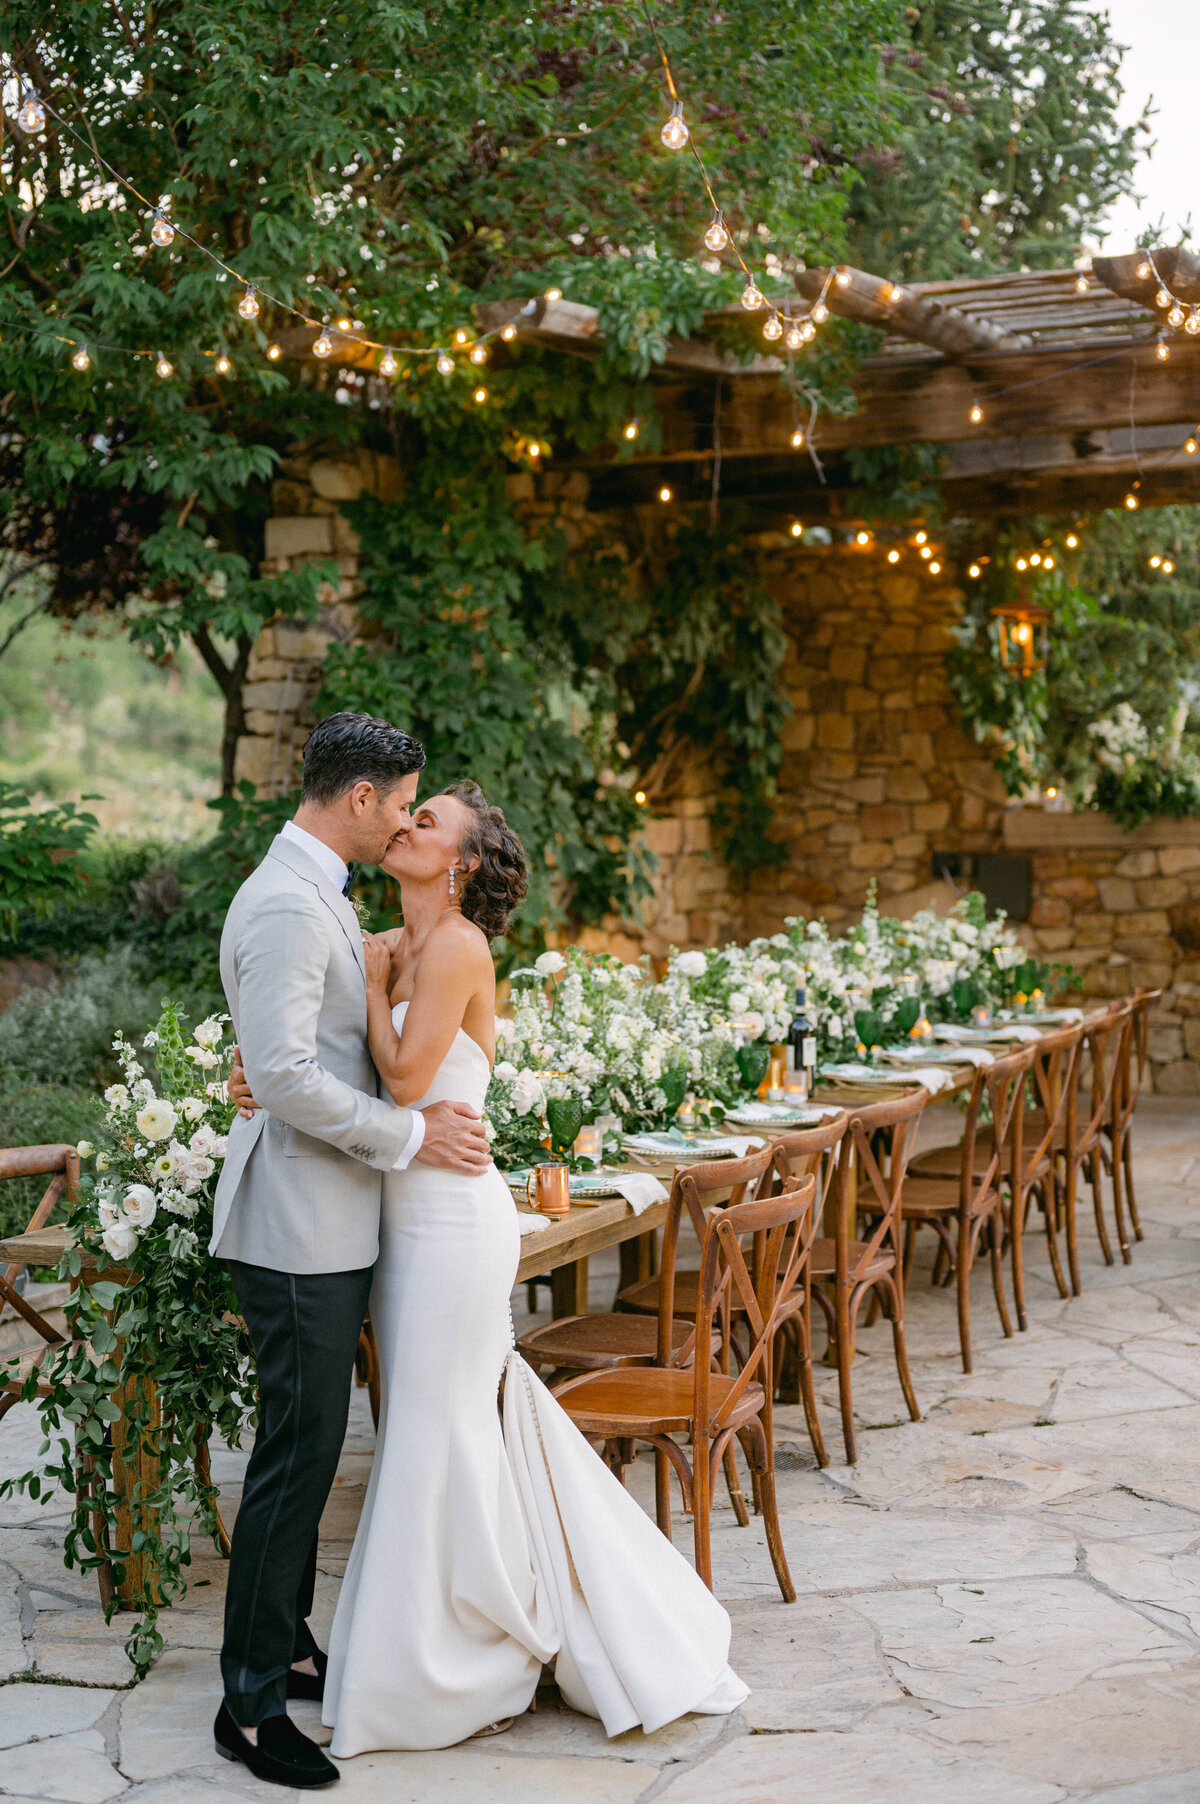 Lia-Ross-Aspen-Snowmass-Patak-Ranch-Wedding-Photography-by-Jacie-Marguerite-836